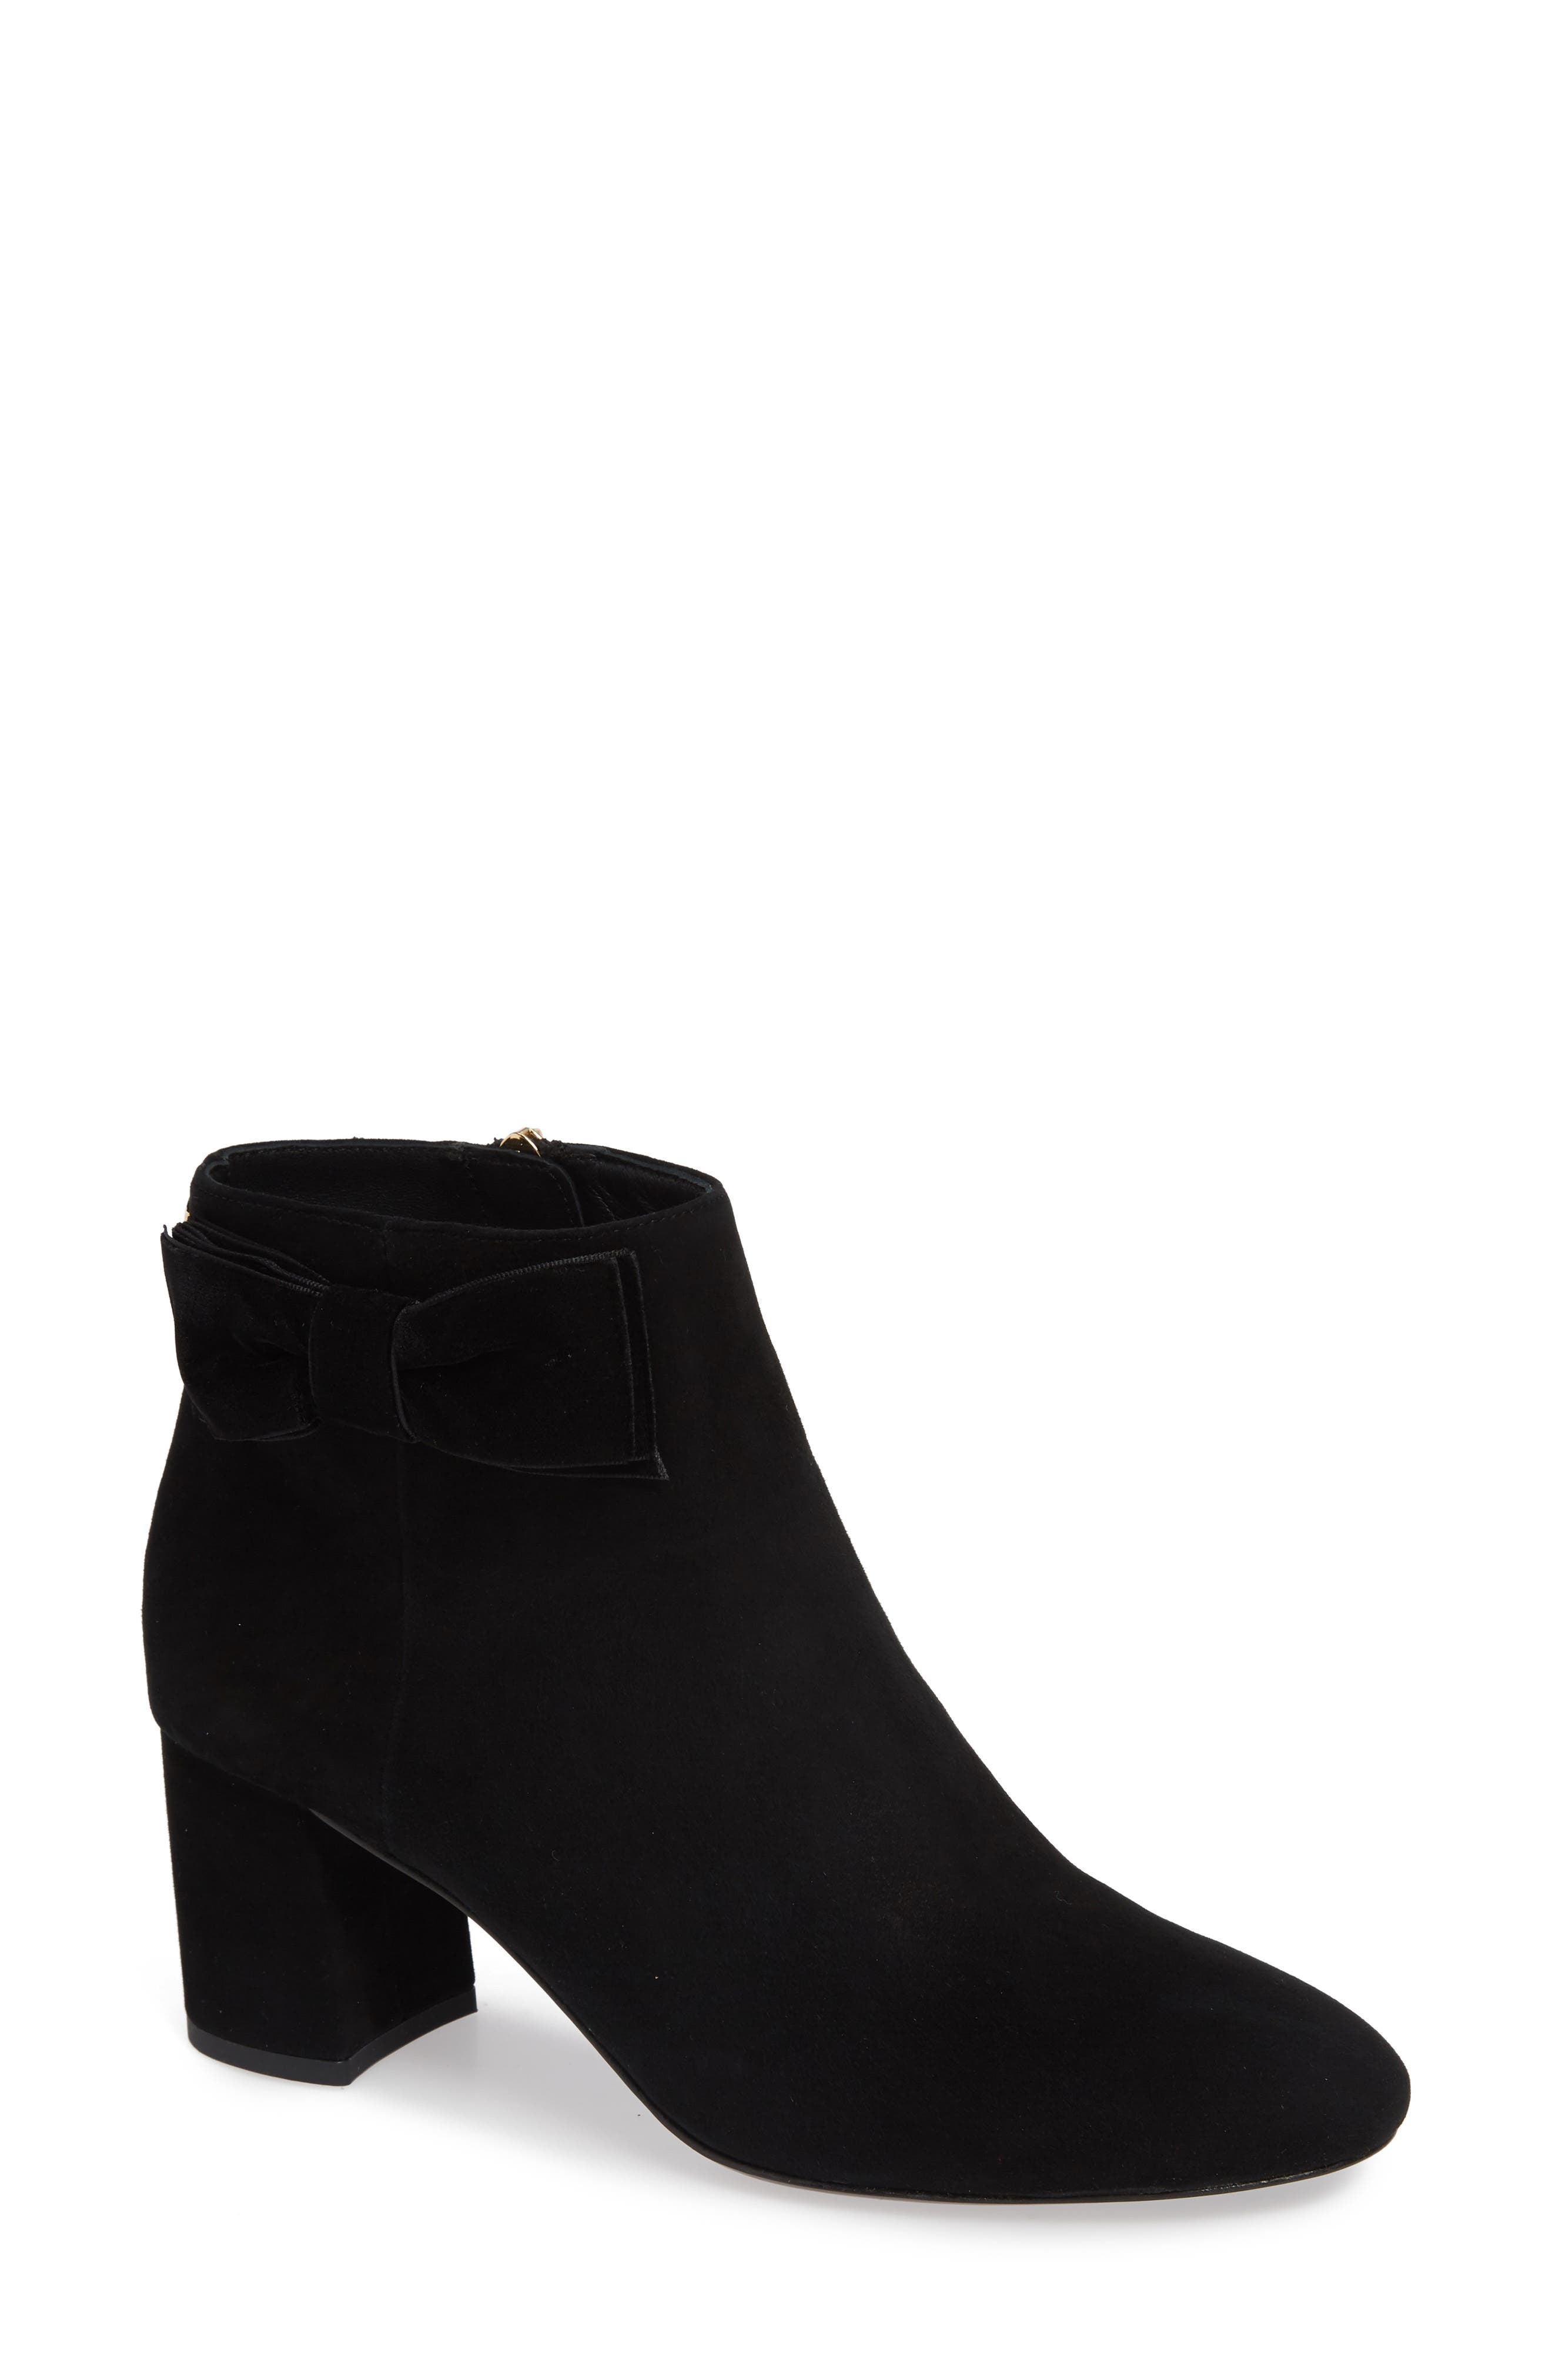 kate spade holly boots